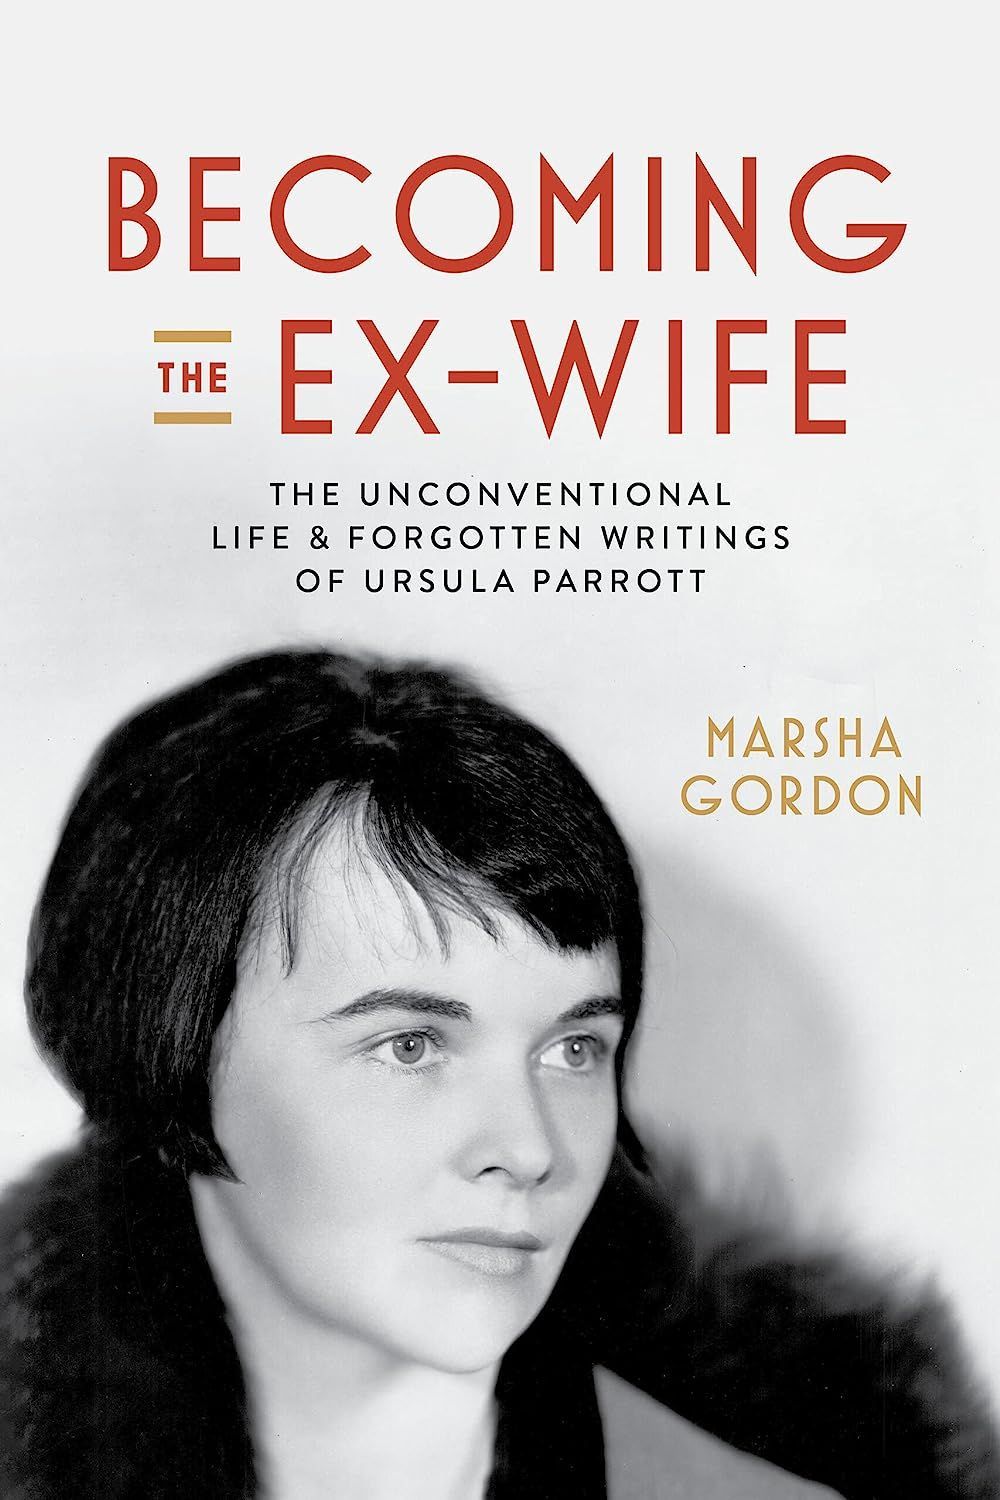 There’s Always Tomorrow: On Ursula Parrott and Marsha Gordon’s “Becoming the Ex-Wife”